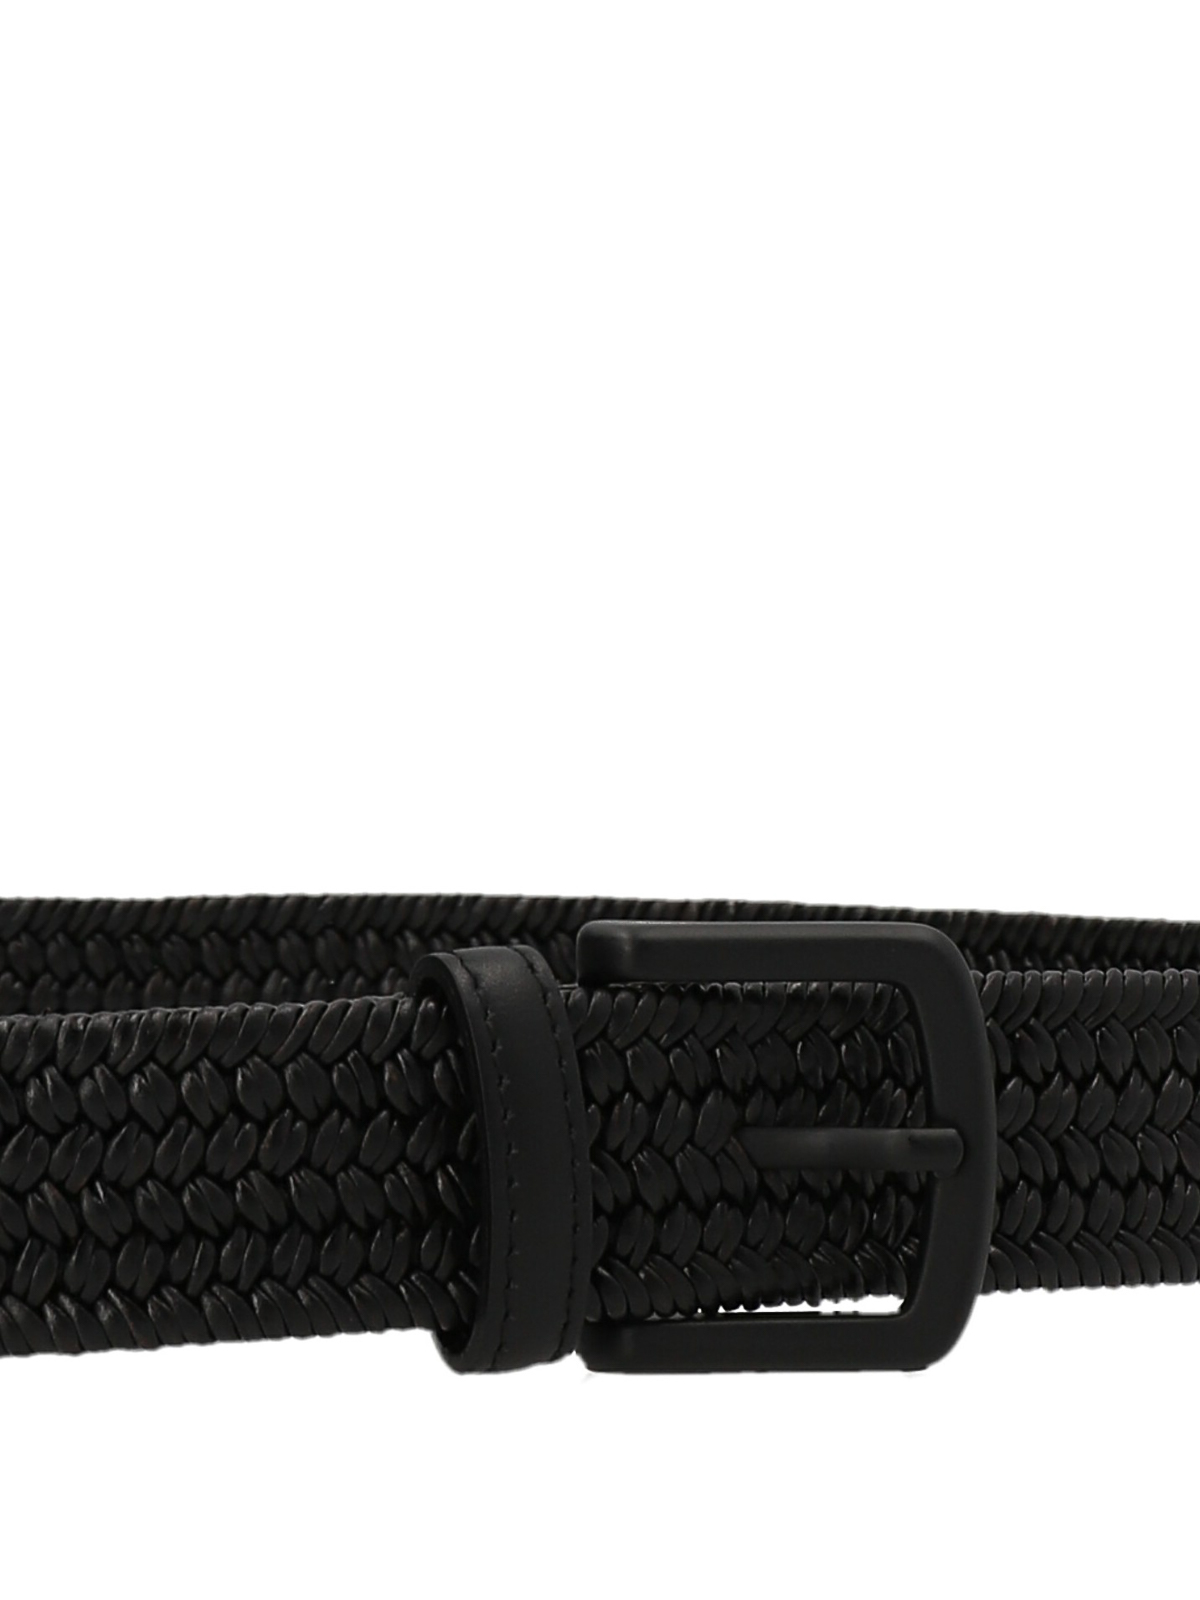 Shop Andrea D'amico Braided Leather Belt In Black